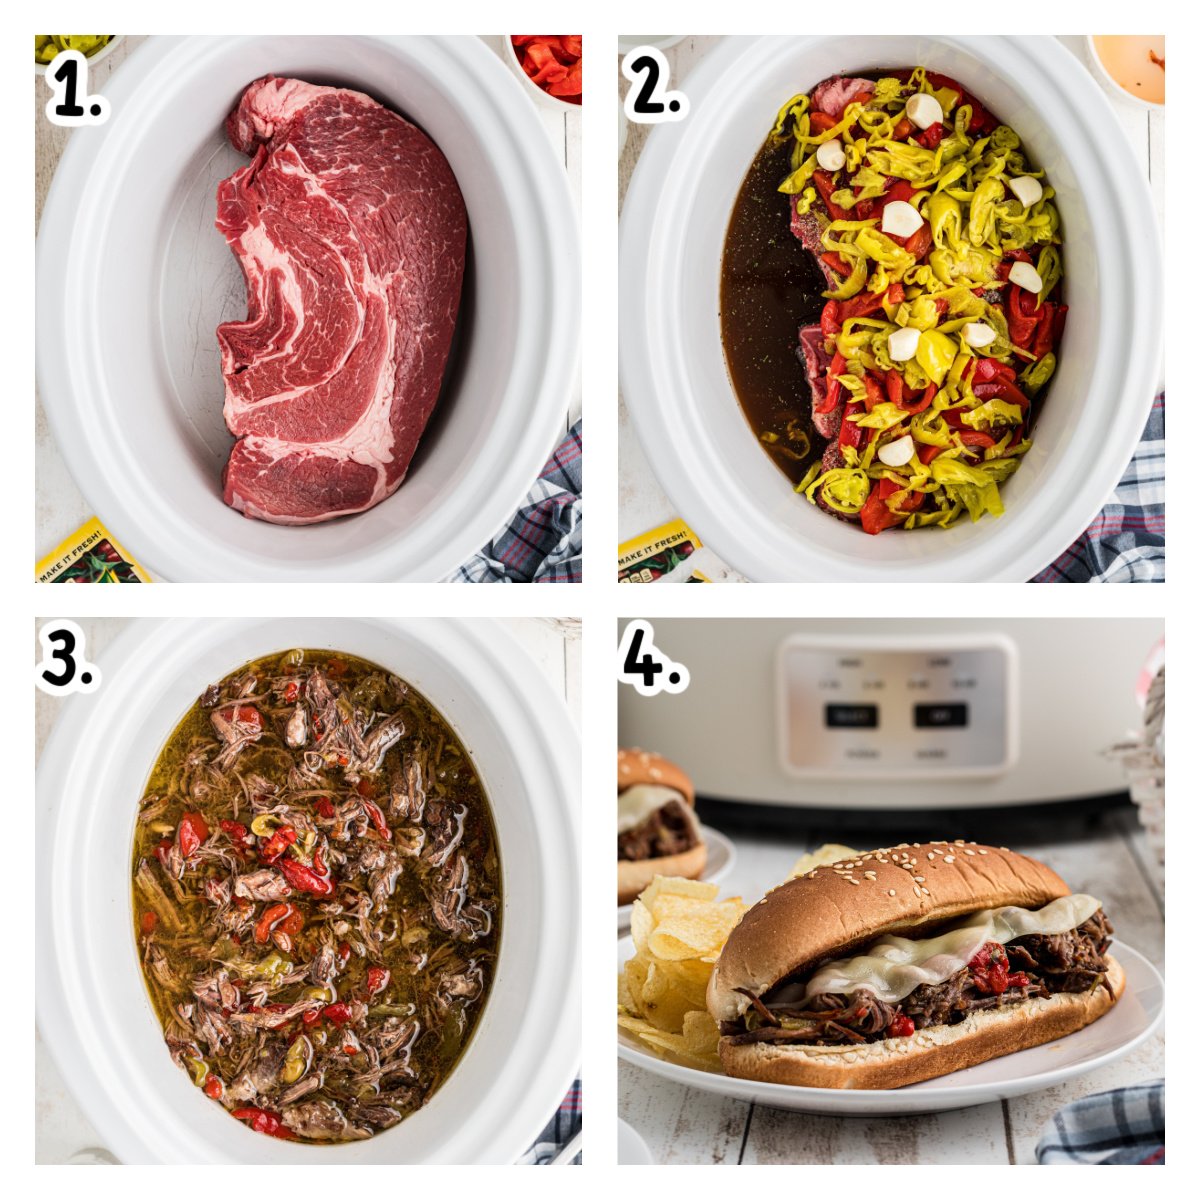 Four images showing how to prepare italian beef for sandwiches in a crock pot.